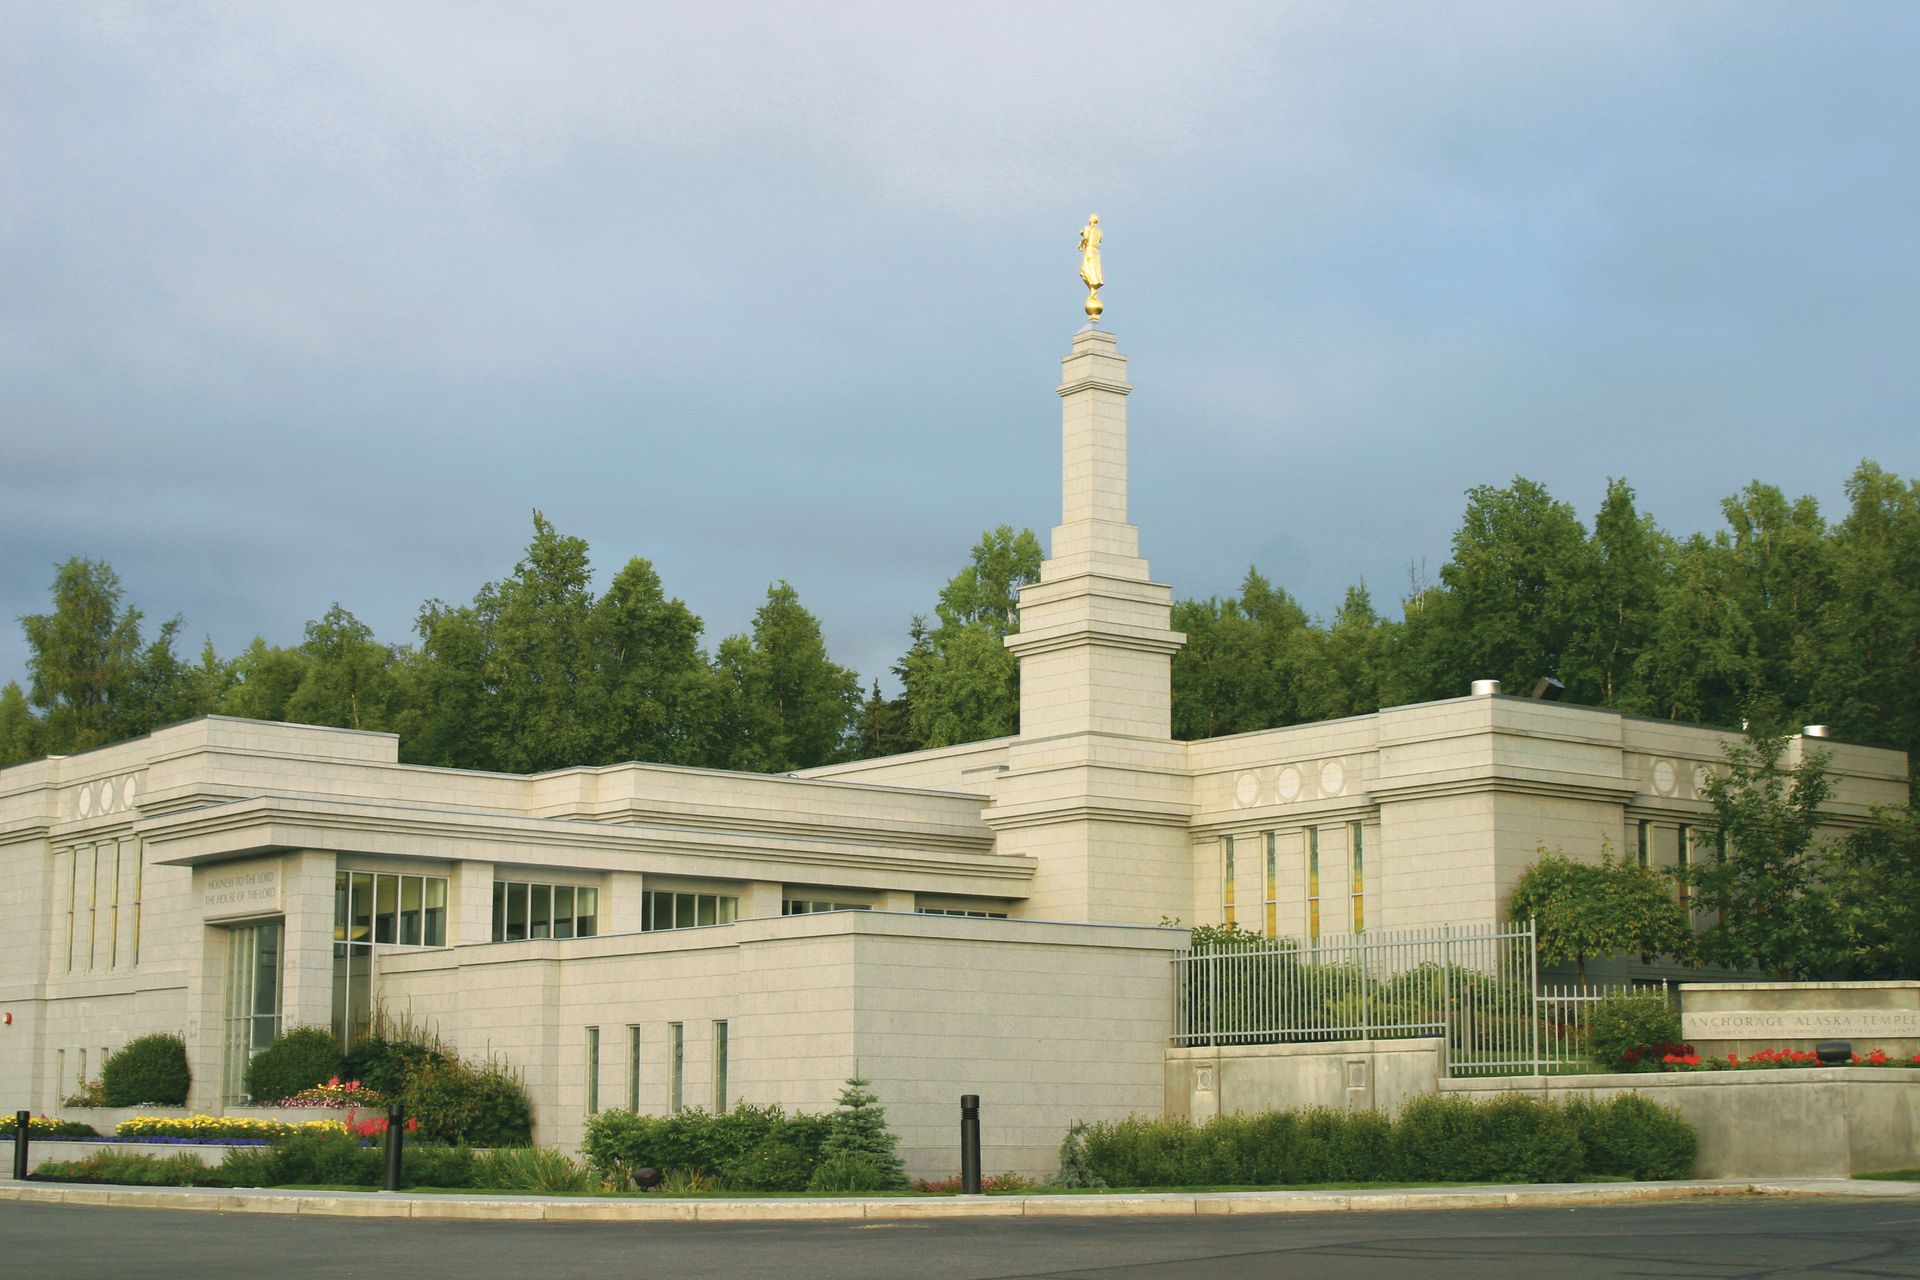 An exterior view of the Anchorage Alaska Temple during the sumner.